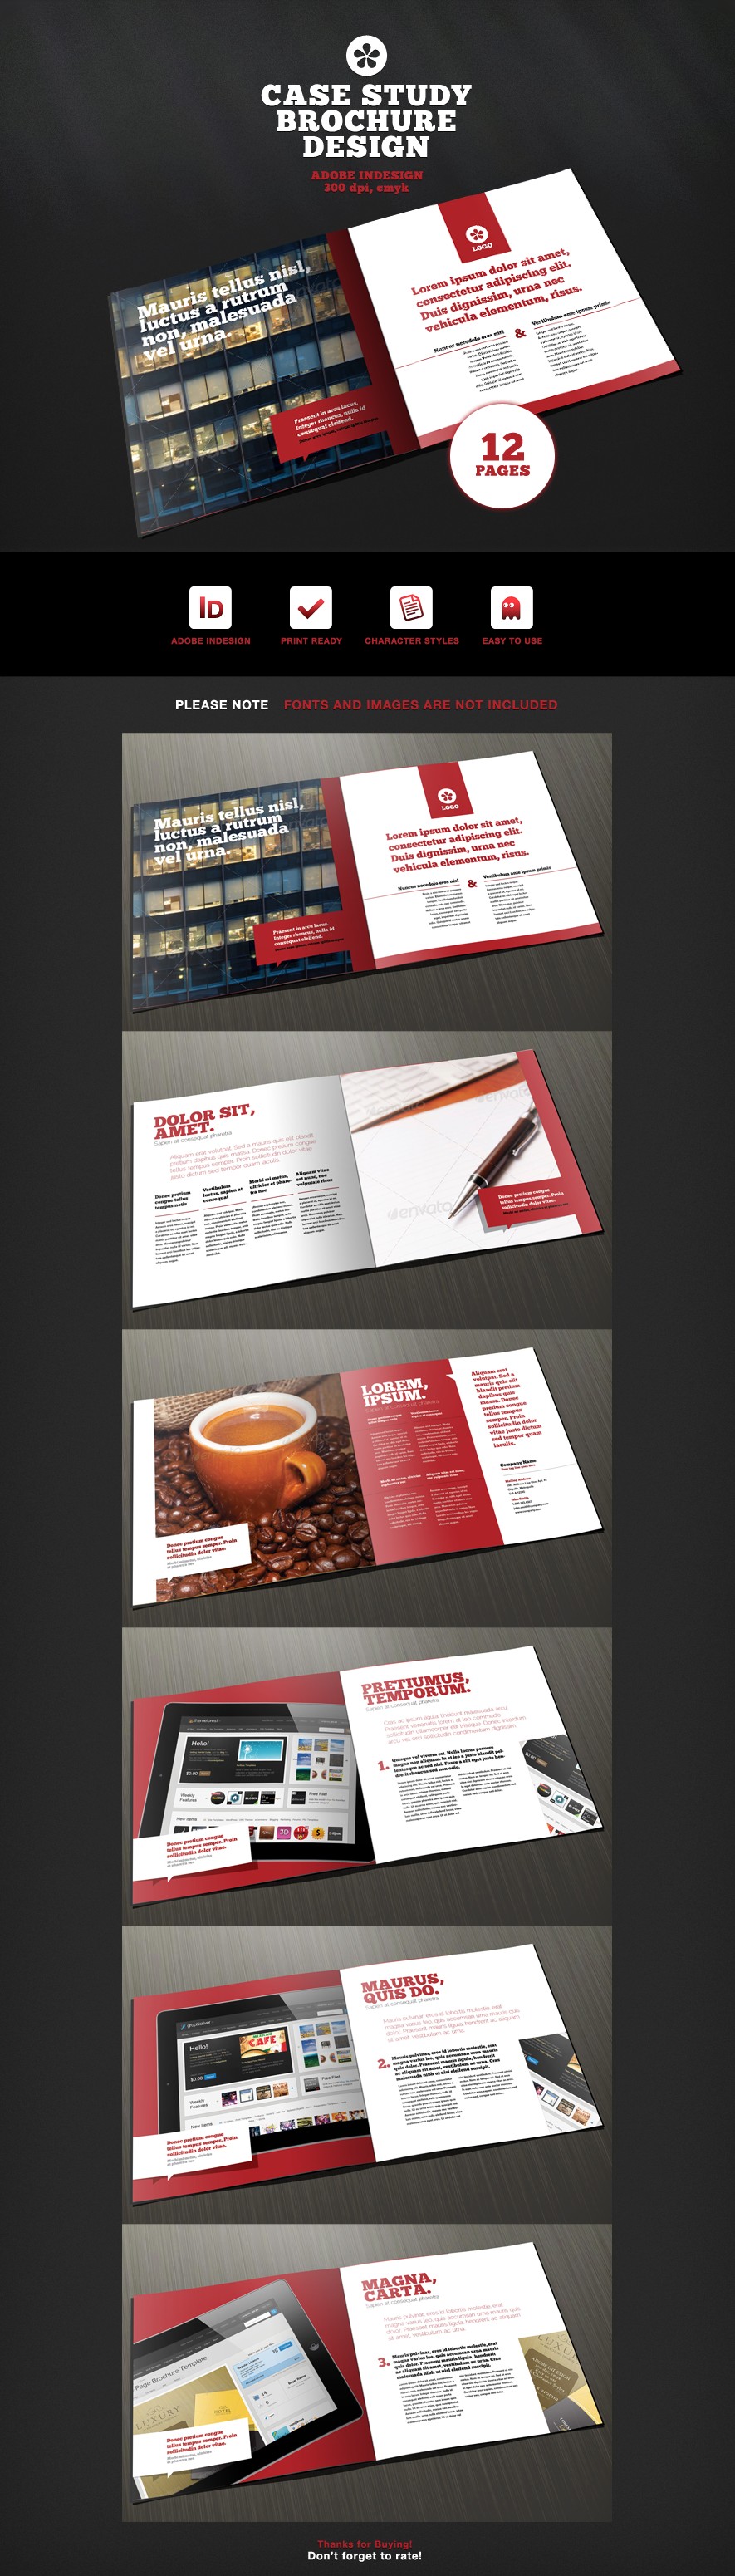 12 Page Case Study Brochure Template By Ramijames On DeviantART